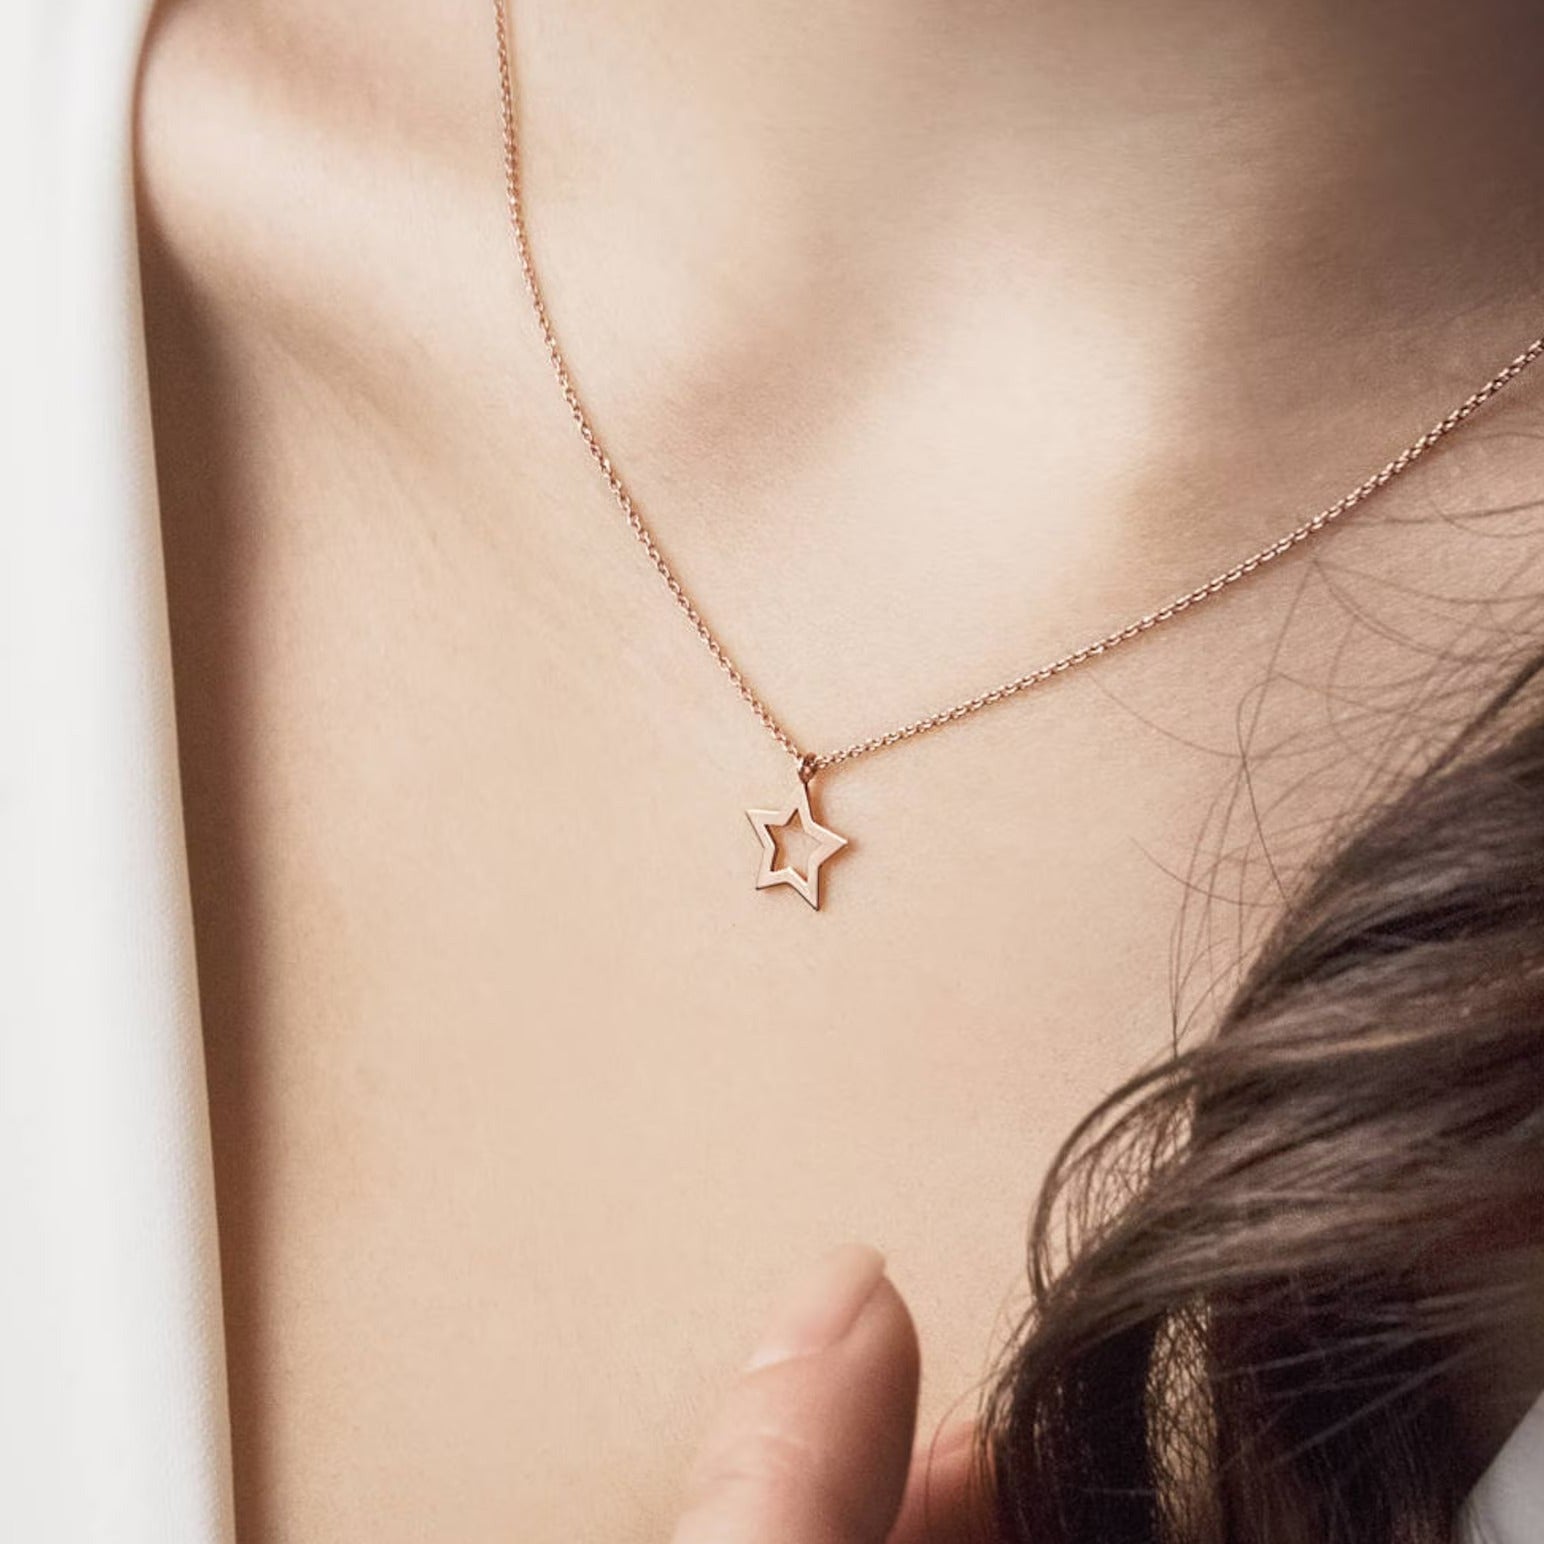 Indulge in the celestial charm of our 18 Carat Gold Tiny Star Necklace - Burst of Arabia. A radiant tribute to Arabian nights, adorned with miniature stars in pure gold.